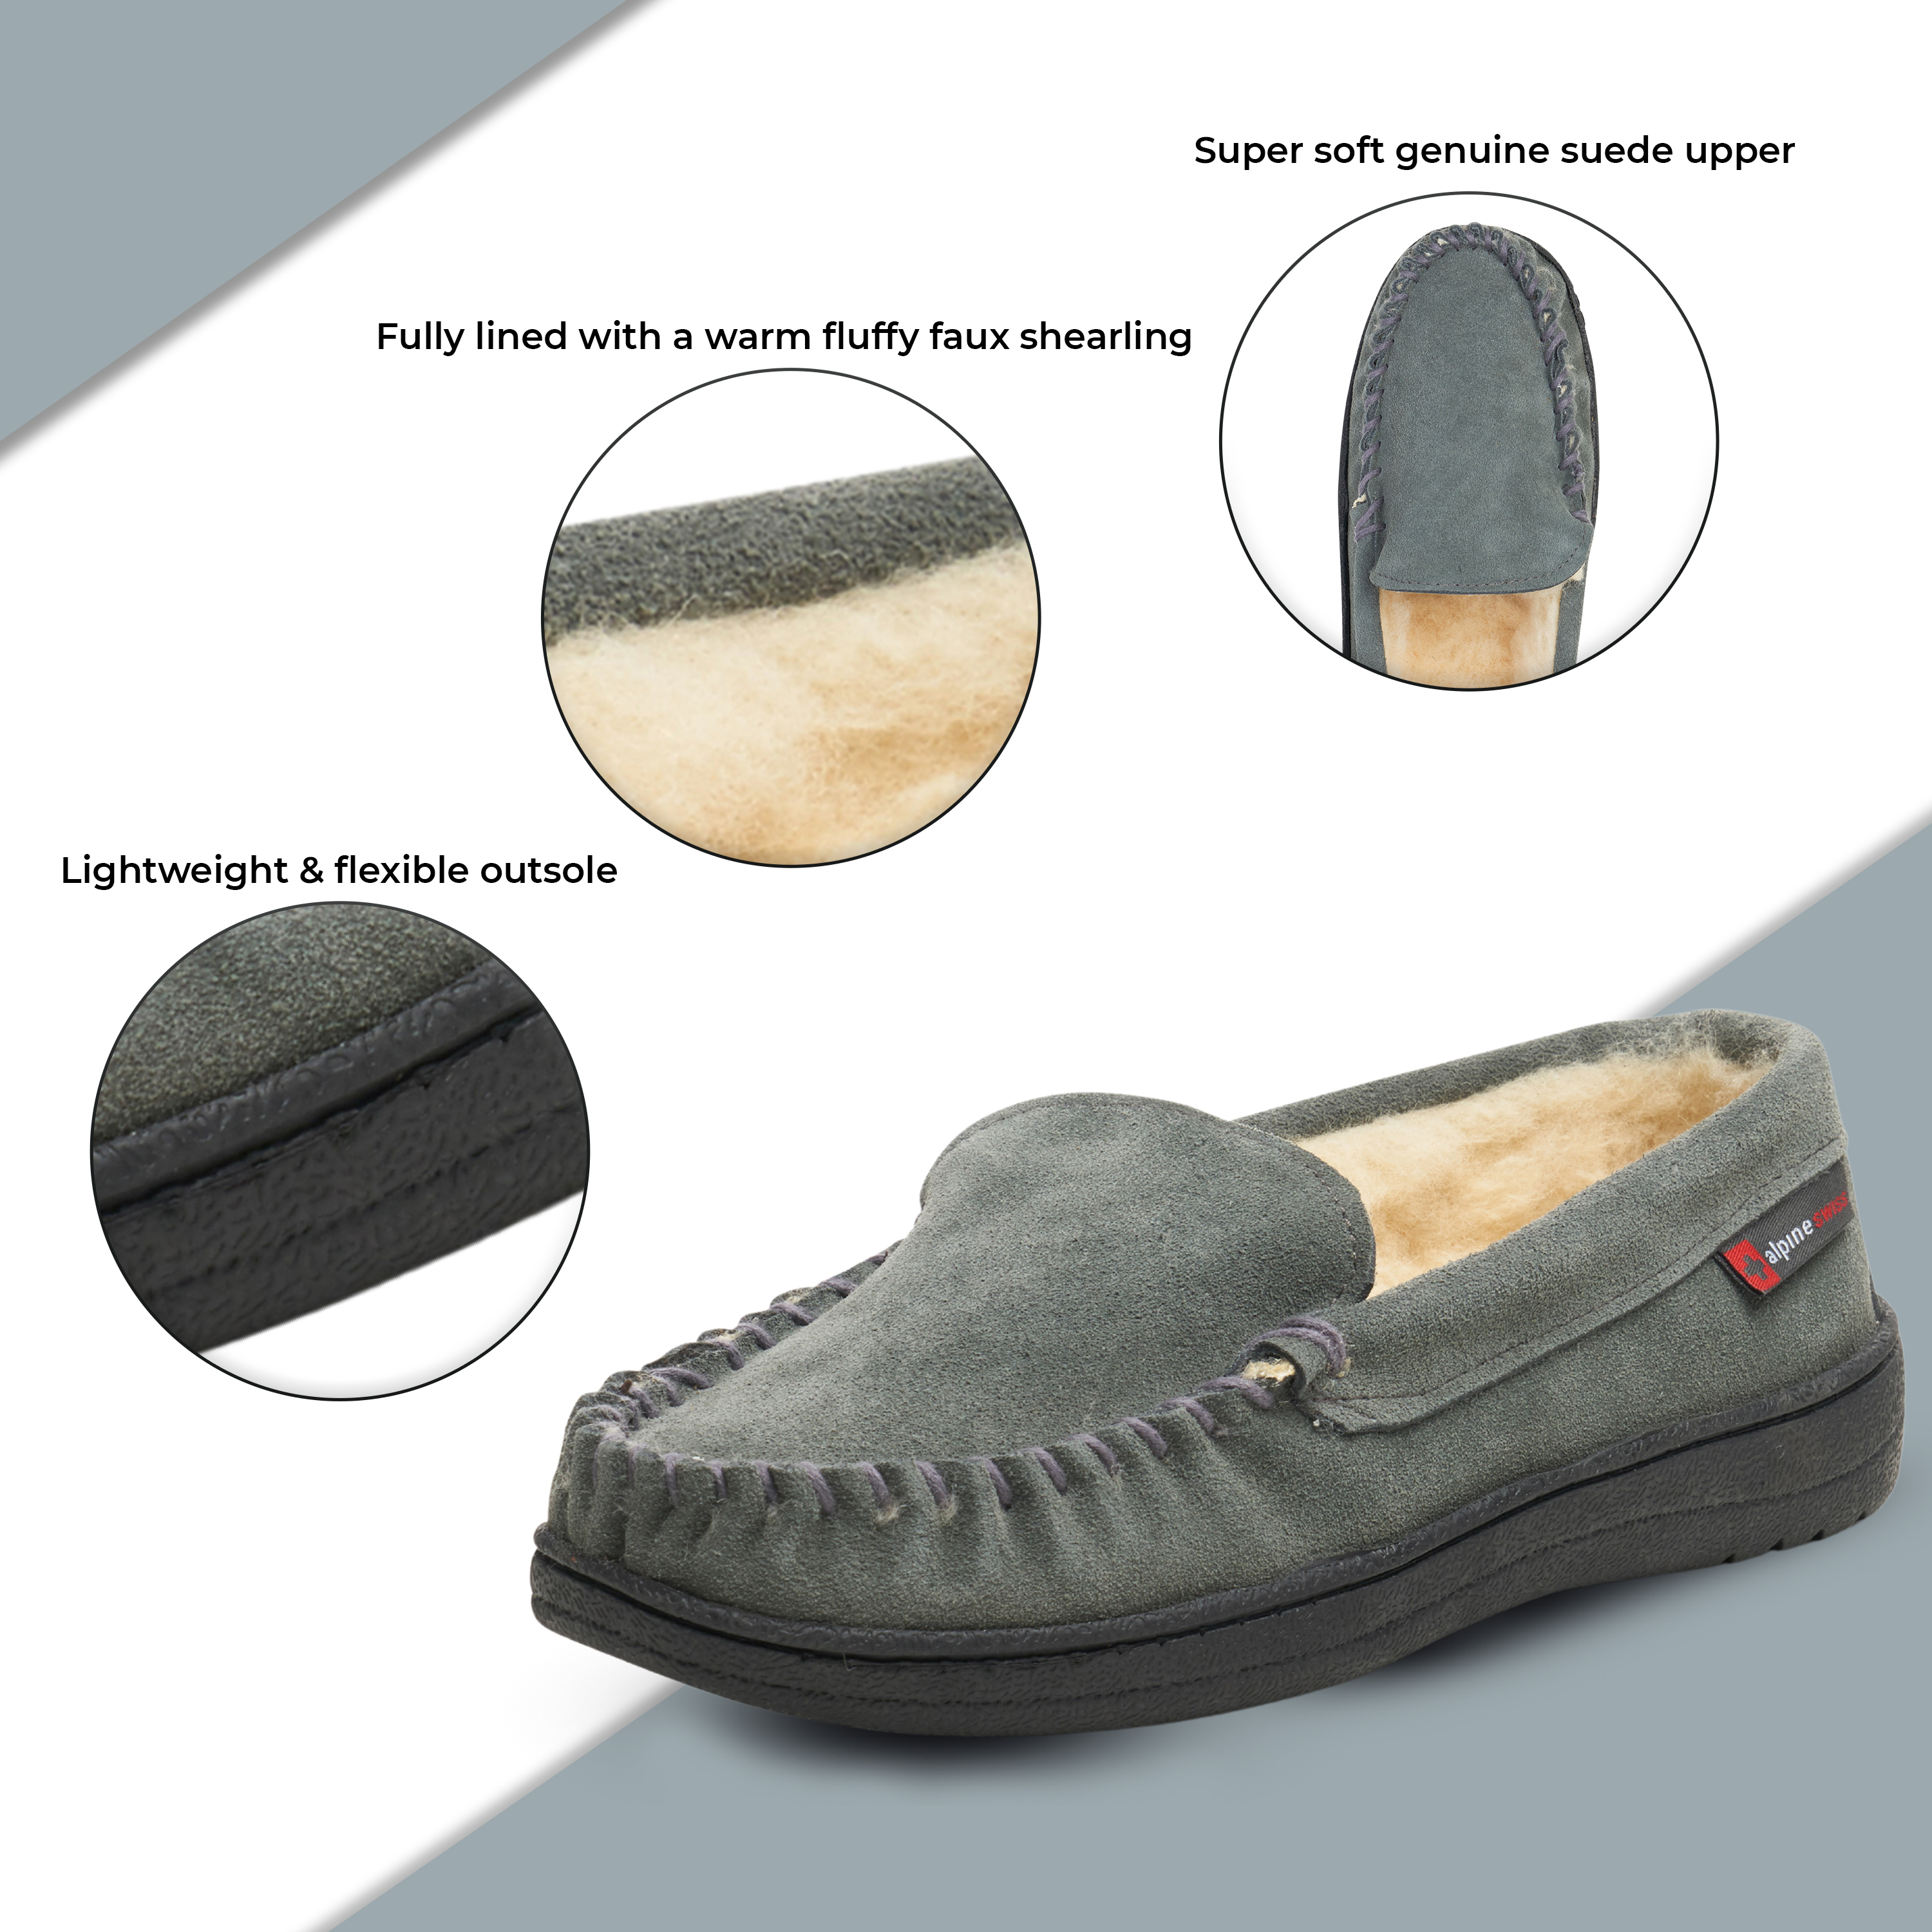 Alpine Swiss Yukon Mens Suede Shearling Moccasin Slippers Moc Toe Slip On Shoes - image 3 of 7